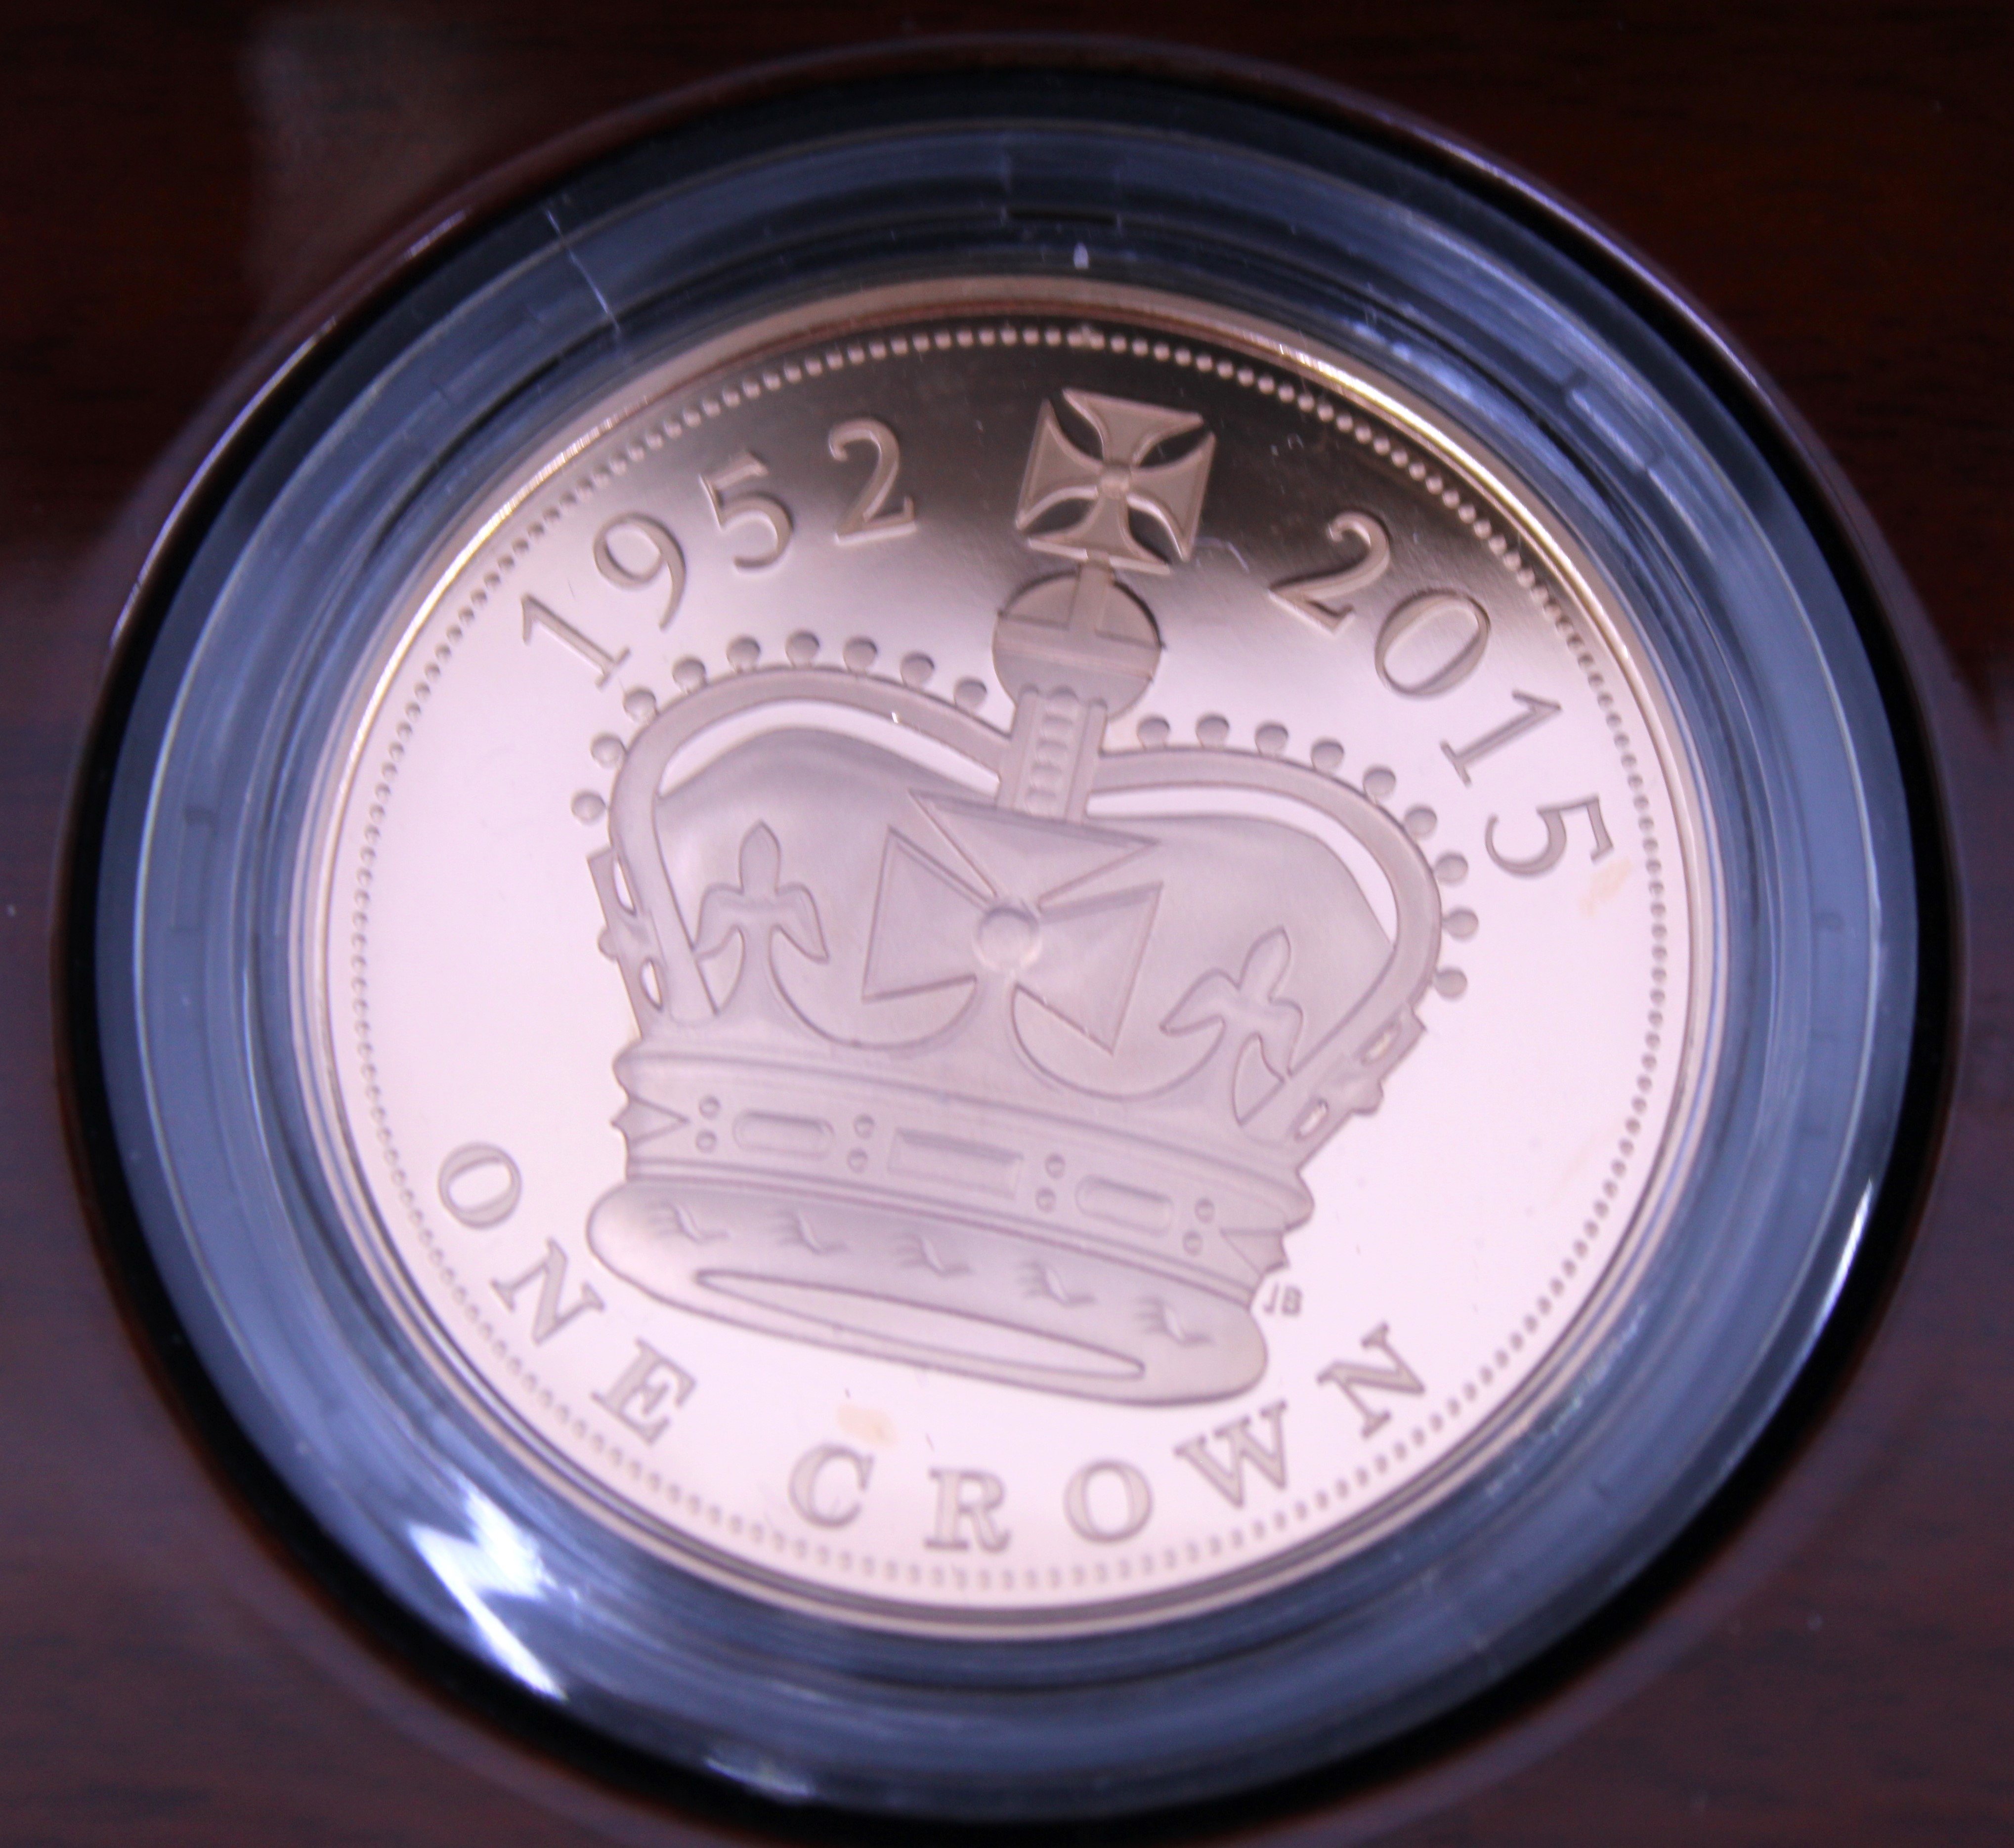 The Royal Mint The Longest Reigning Monarch 2015 UK Gold Proof Coin. Boxed with Certificate of - Image 2 of 3